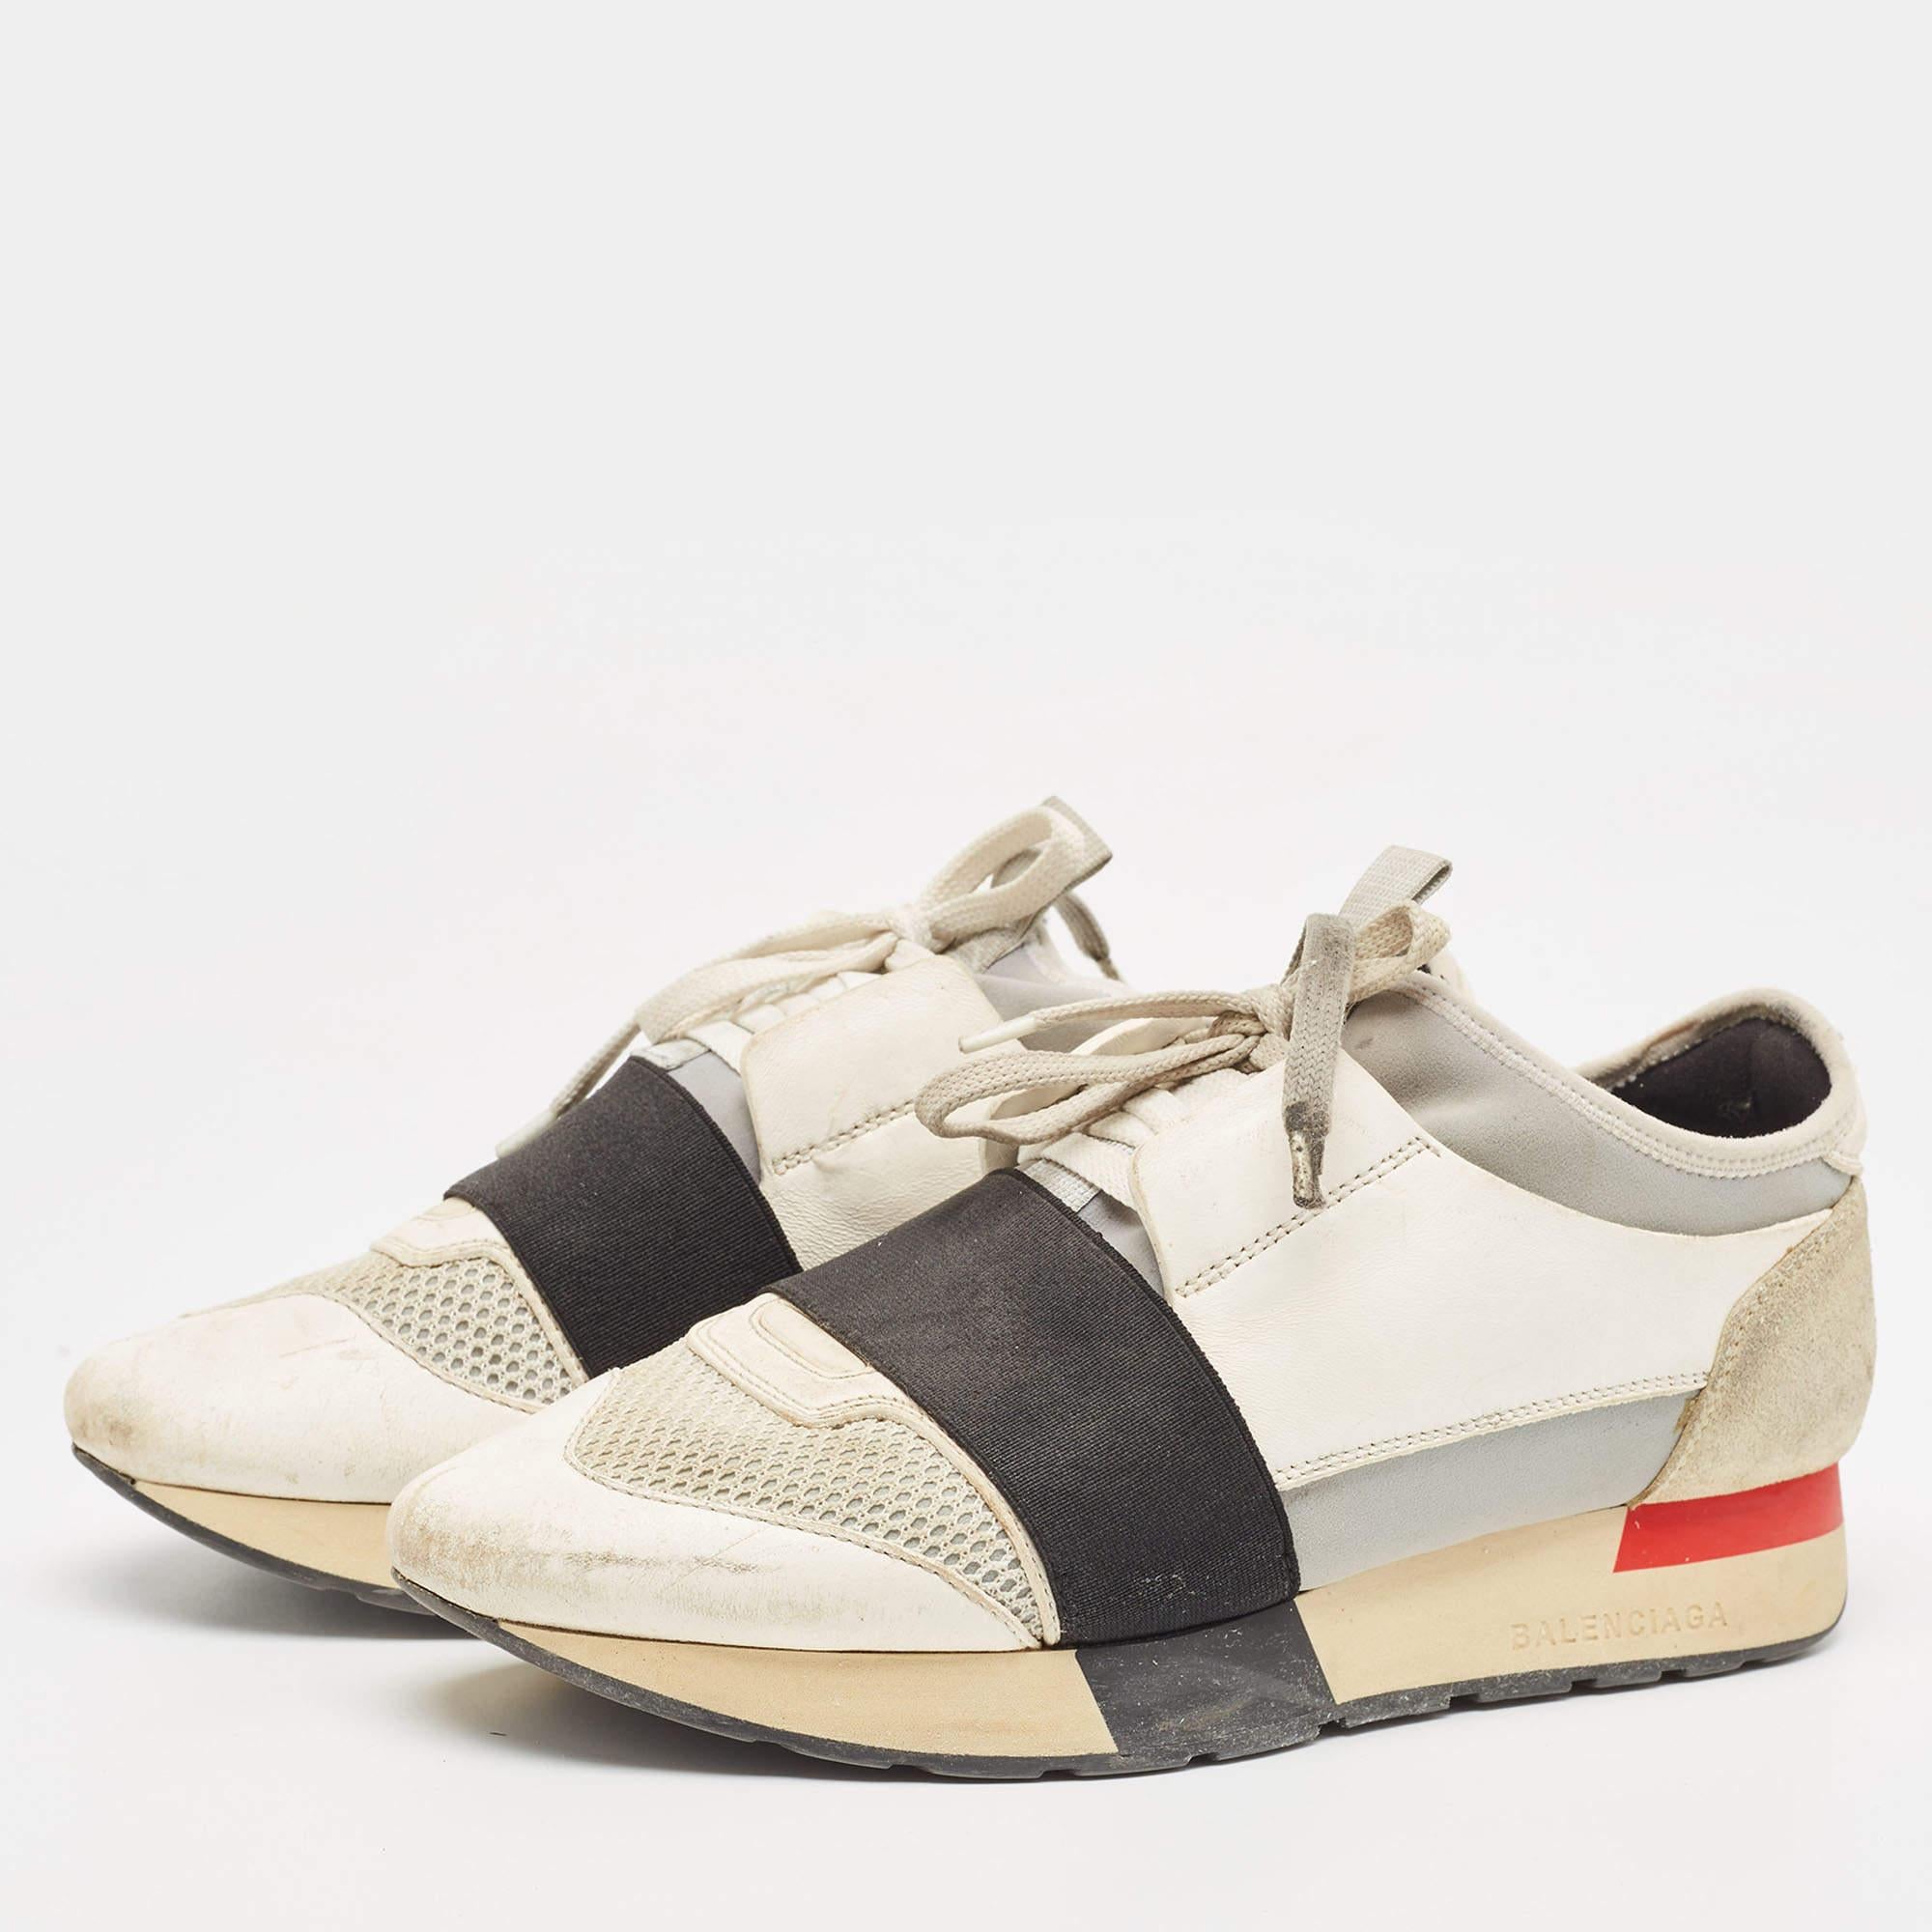 Balenciaga Multicolor Suede and Leather Race Runner Sneakers Size 37 For Sale 3